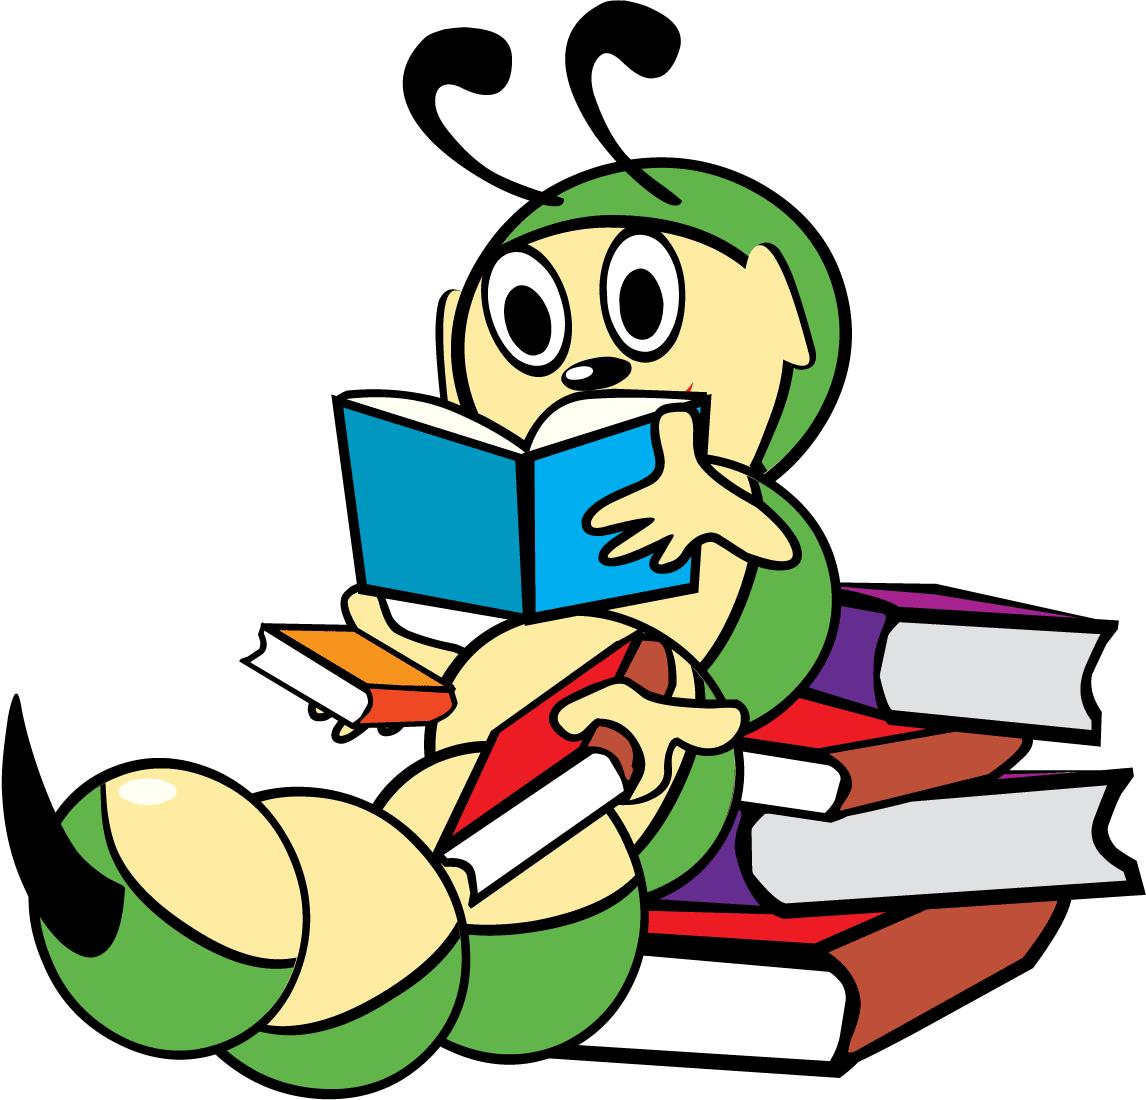 Student taking a test clip art - Free Clipart Images